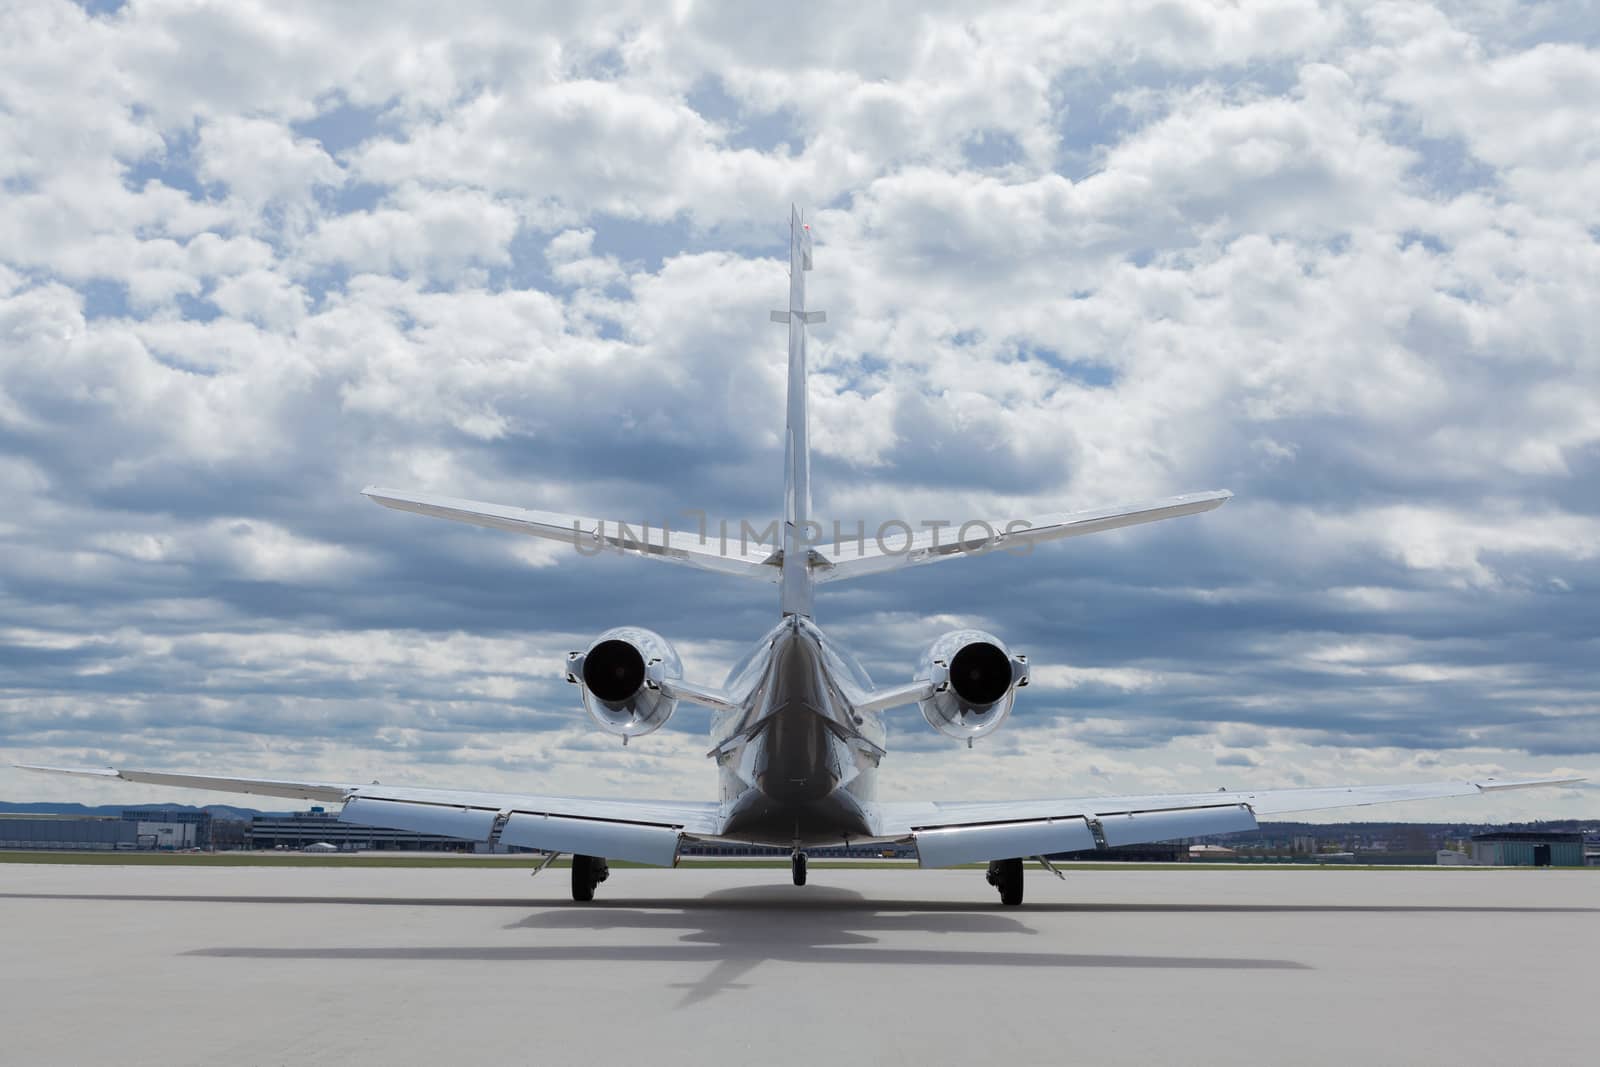 Aircraft learjet Plane in front of the Airport with cloudy sky by juniart